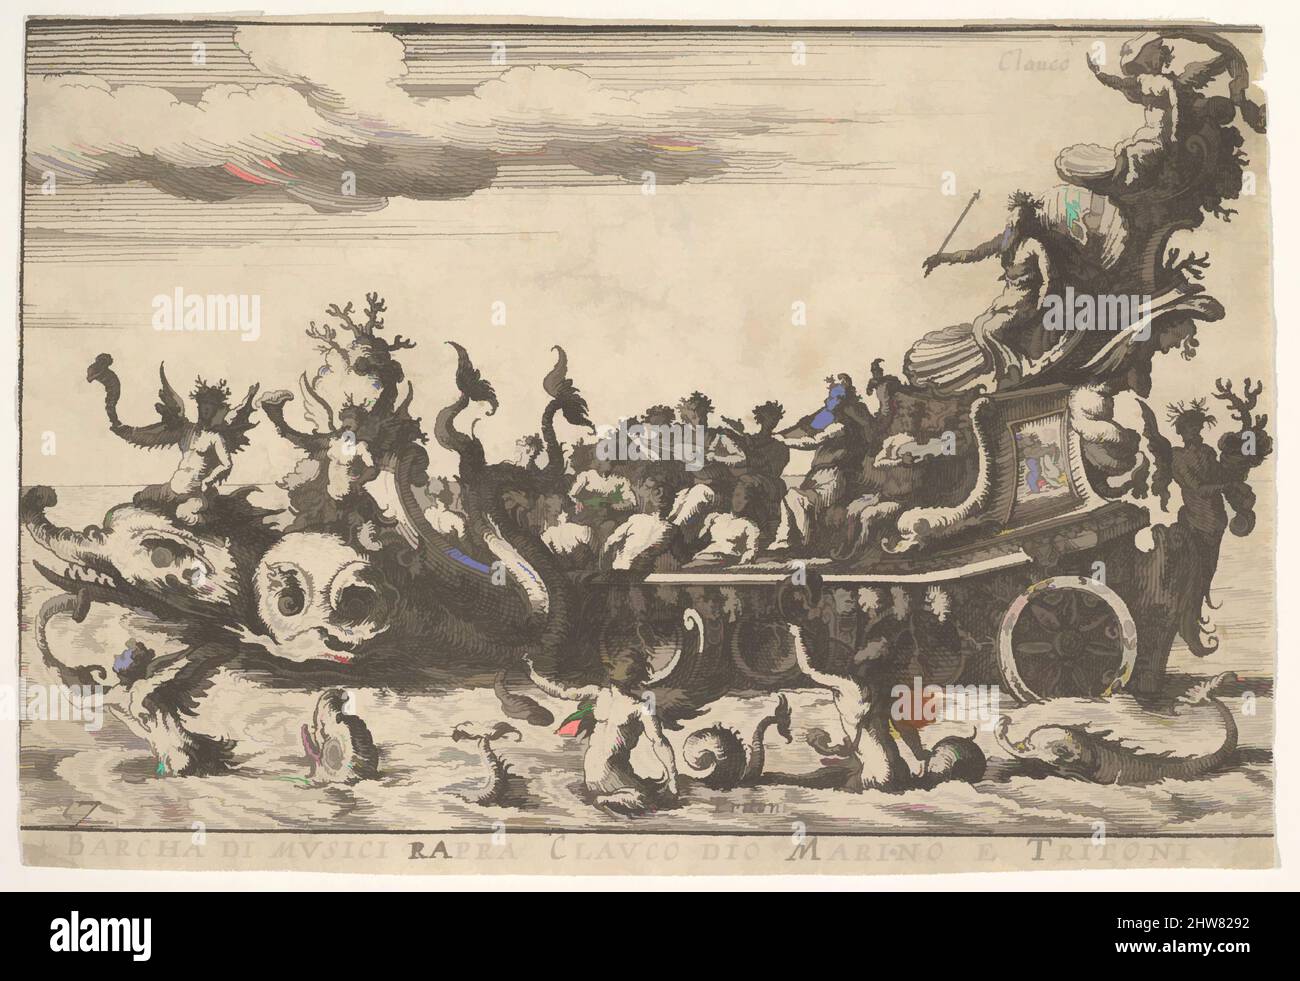 Plate 16: Ship of musicians with the sea god Claucus and tritons (Barcha di musici rapra Clauco dio marino e Tritoni), from the series 'The magnificent pageant on the river Arno in Florence for the marriage of the Grand Duke' (Le Magnifique carousel fait sur le fleuve de l'Arne a Florence, pour le mariage du Grand Duc), for the wedding celebration of Cosimo de' Medici in Florence, 1608, 1664, Etching, Sheet: 3 1/4 x 4 13/16 in. (8.3 x 12.2 cm), After Remigio Cantagallina (Italian, Borgo Sansepolcro ca. 1582–1656 Florence) Stock Photo